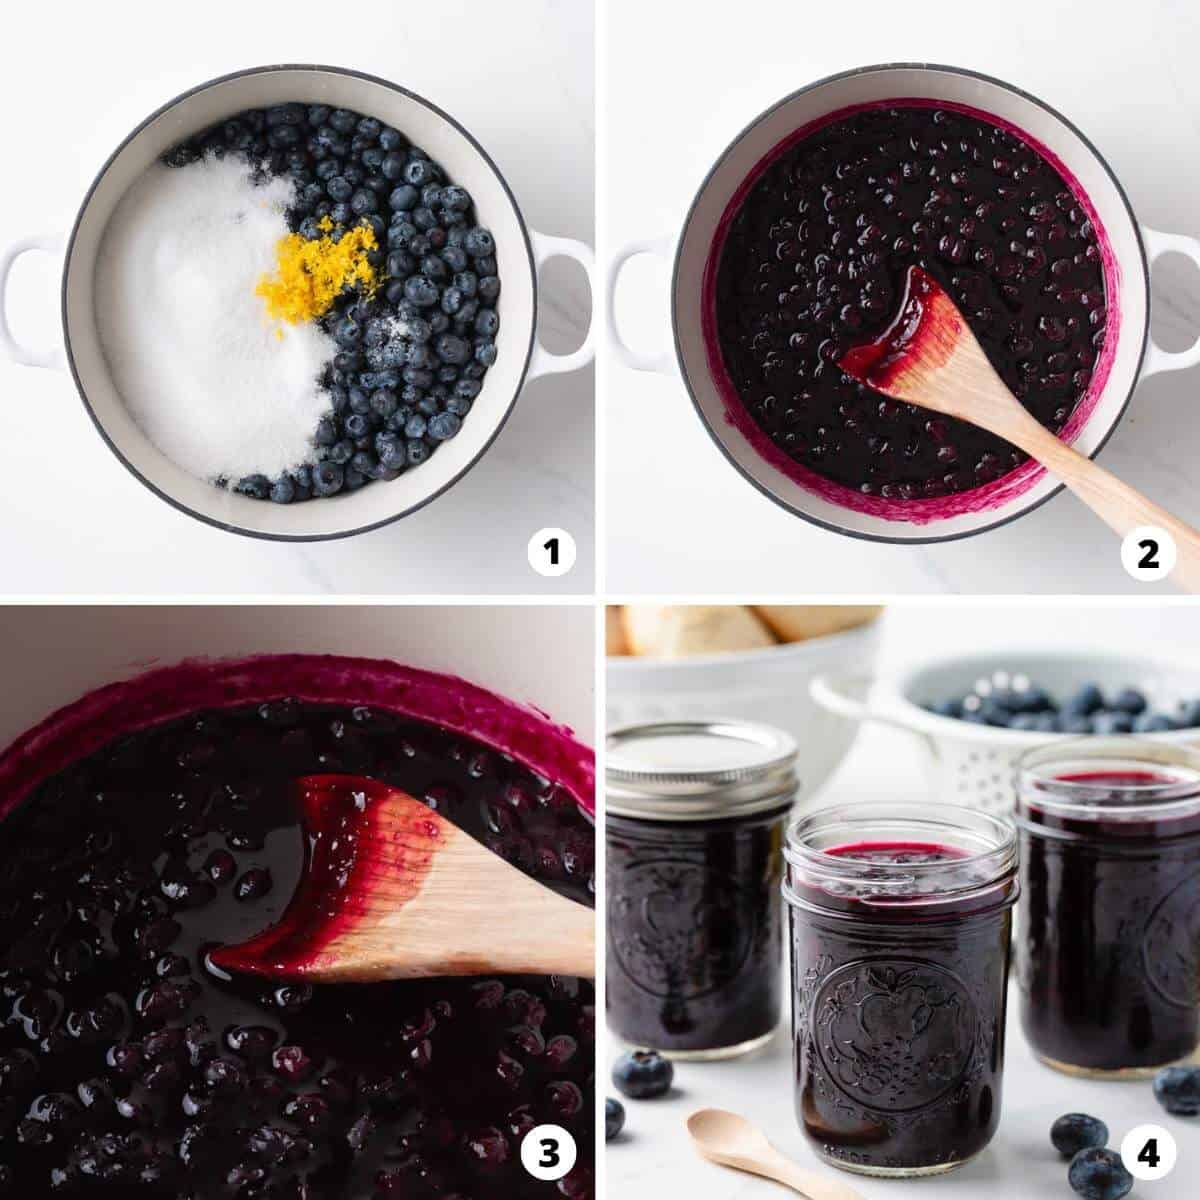 Showing how to make blueberry jam in a 4 step collage.